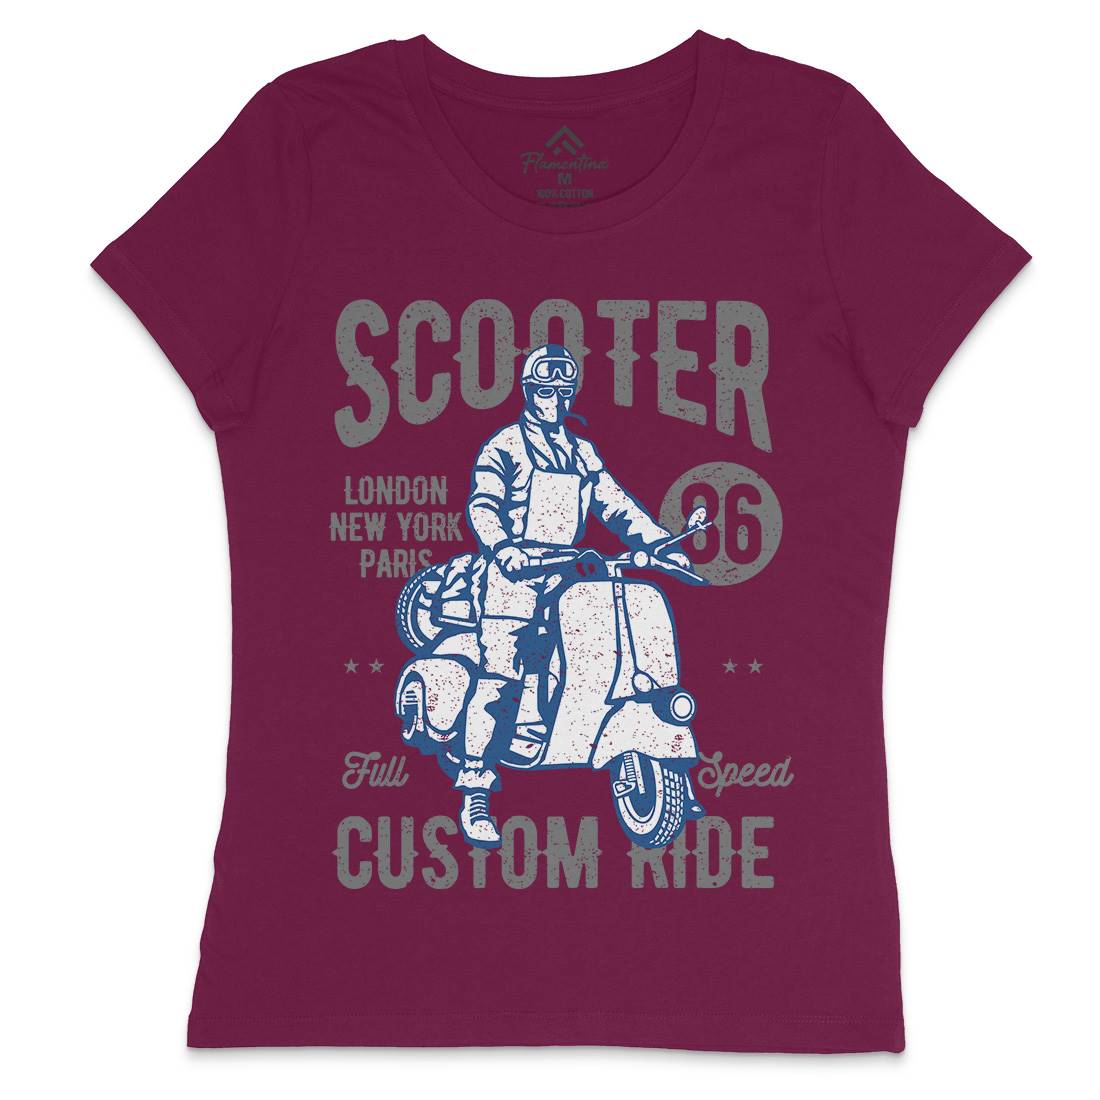 Vintage Scooter Womens Crew Neck T-Shirt Motorcycles A787